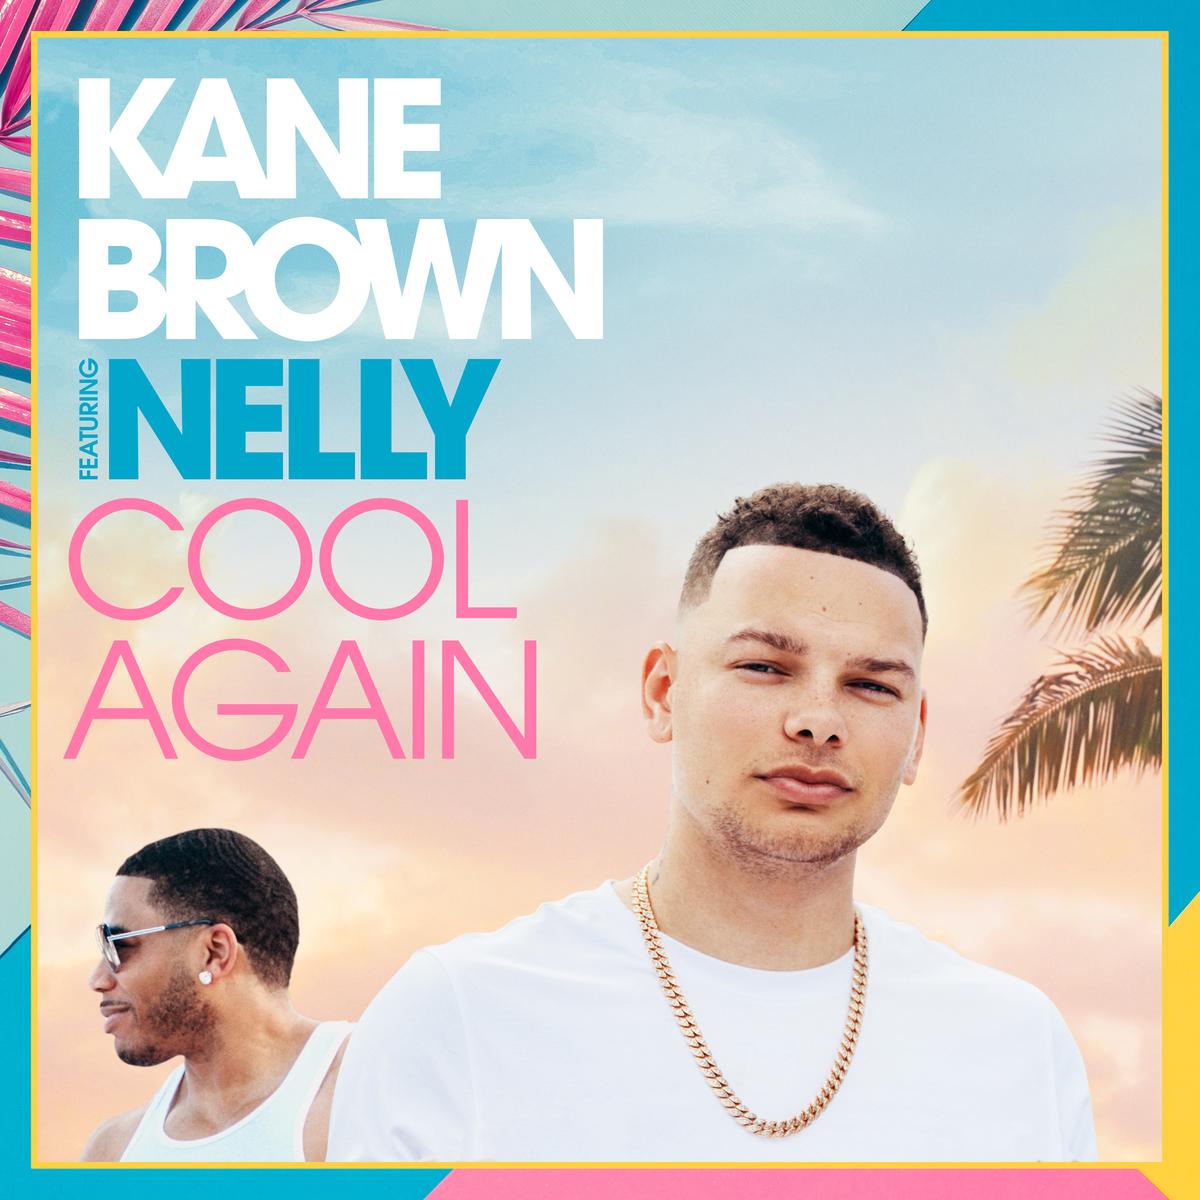 Kane Brown Recruits Nelly For A Remix To “Cool Again”